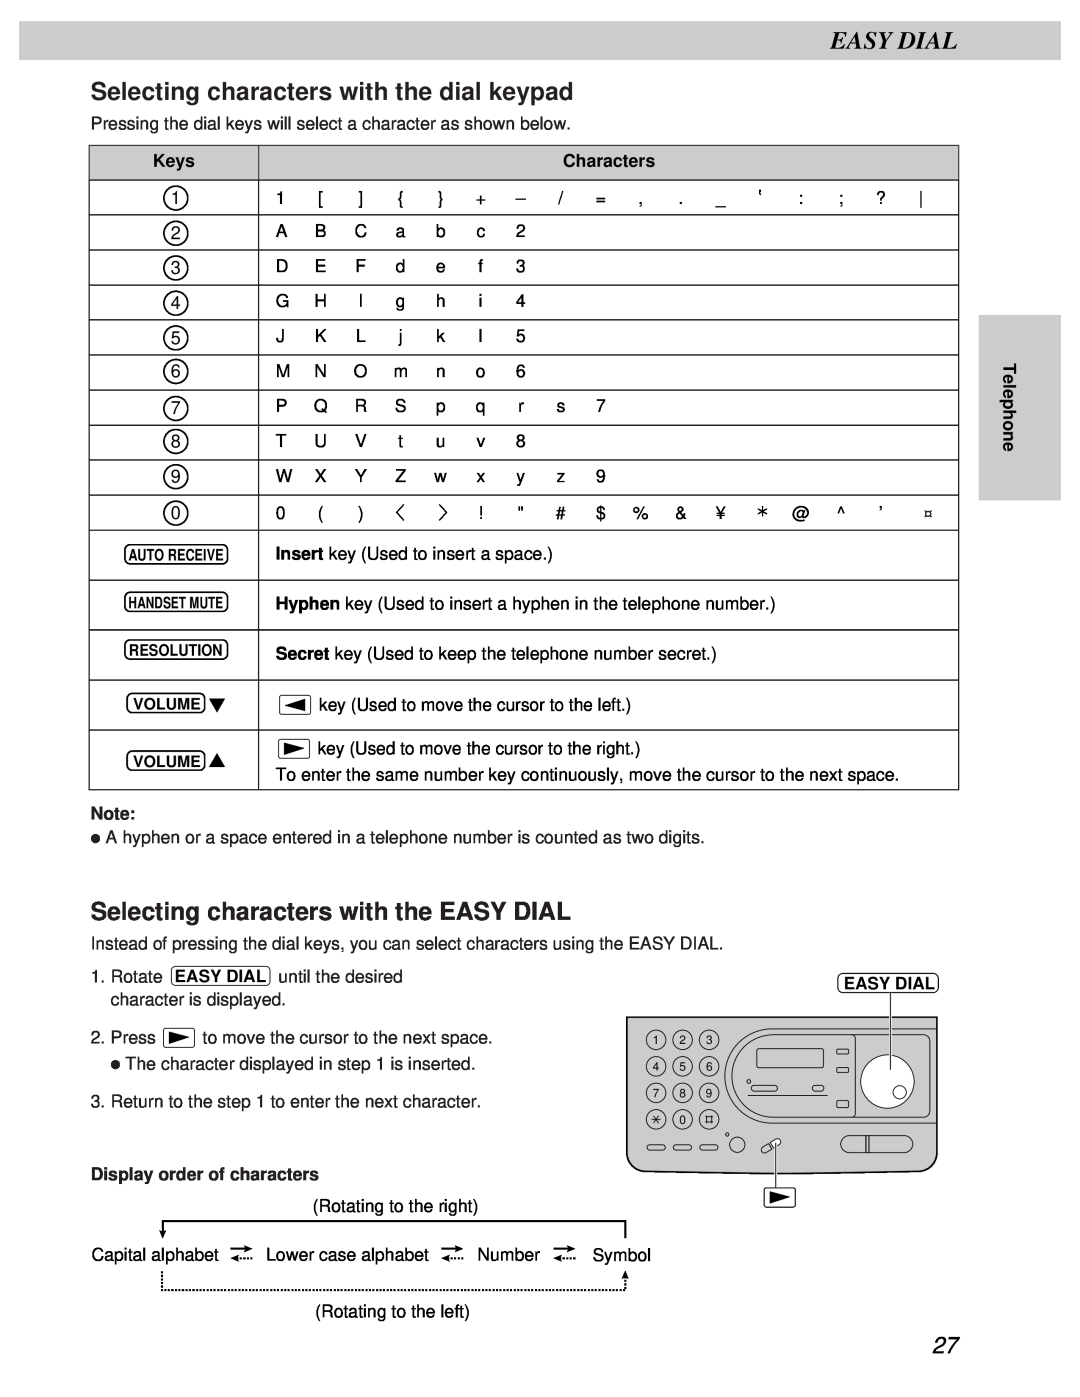 Panasonic KX-FT31BX Easy Dial, Selecting characters with the dial keypad, Selecting characters with the EASY DIAL 